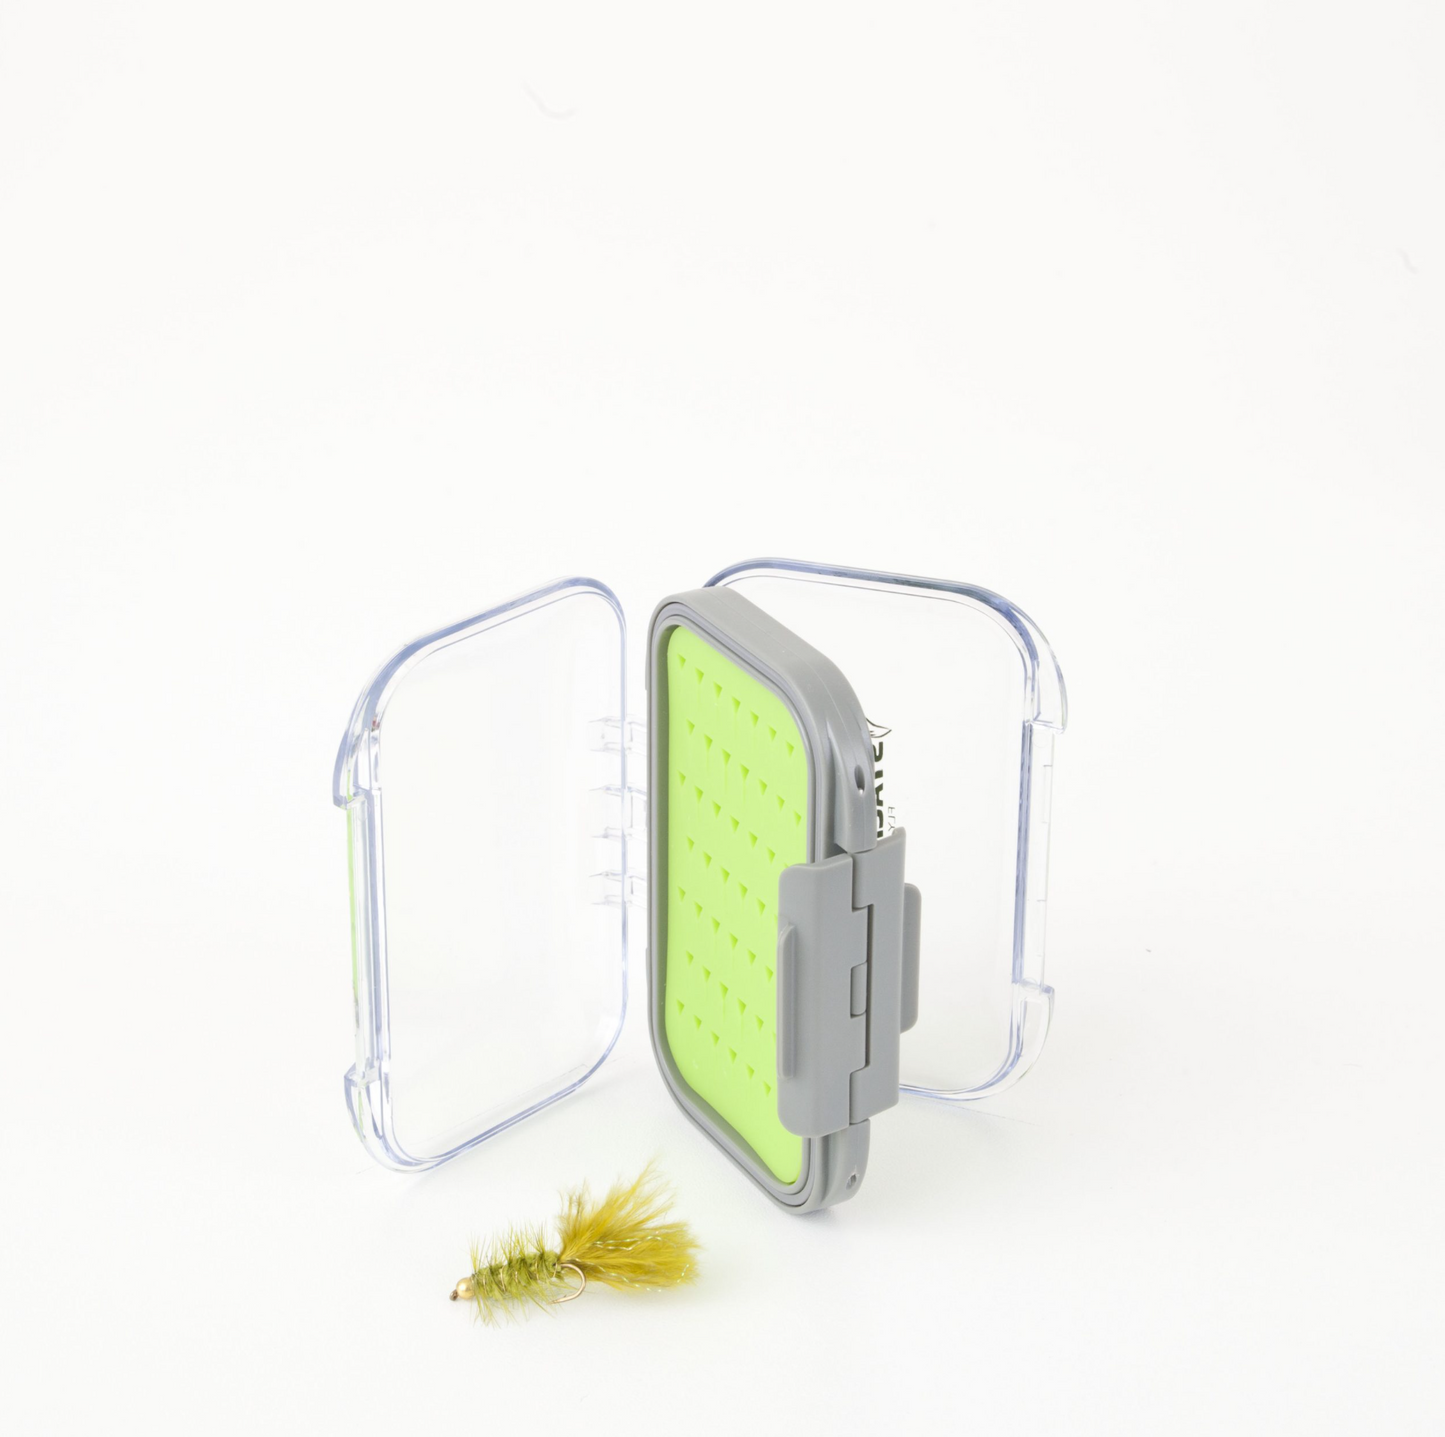 Stalker Double Sided Green Slit Silicone Fly Box - Small